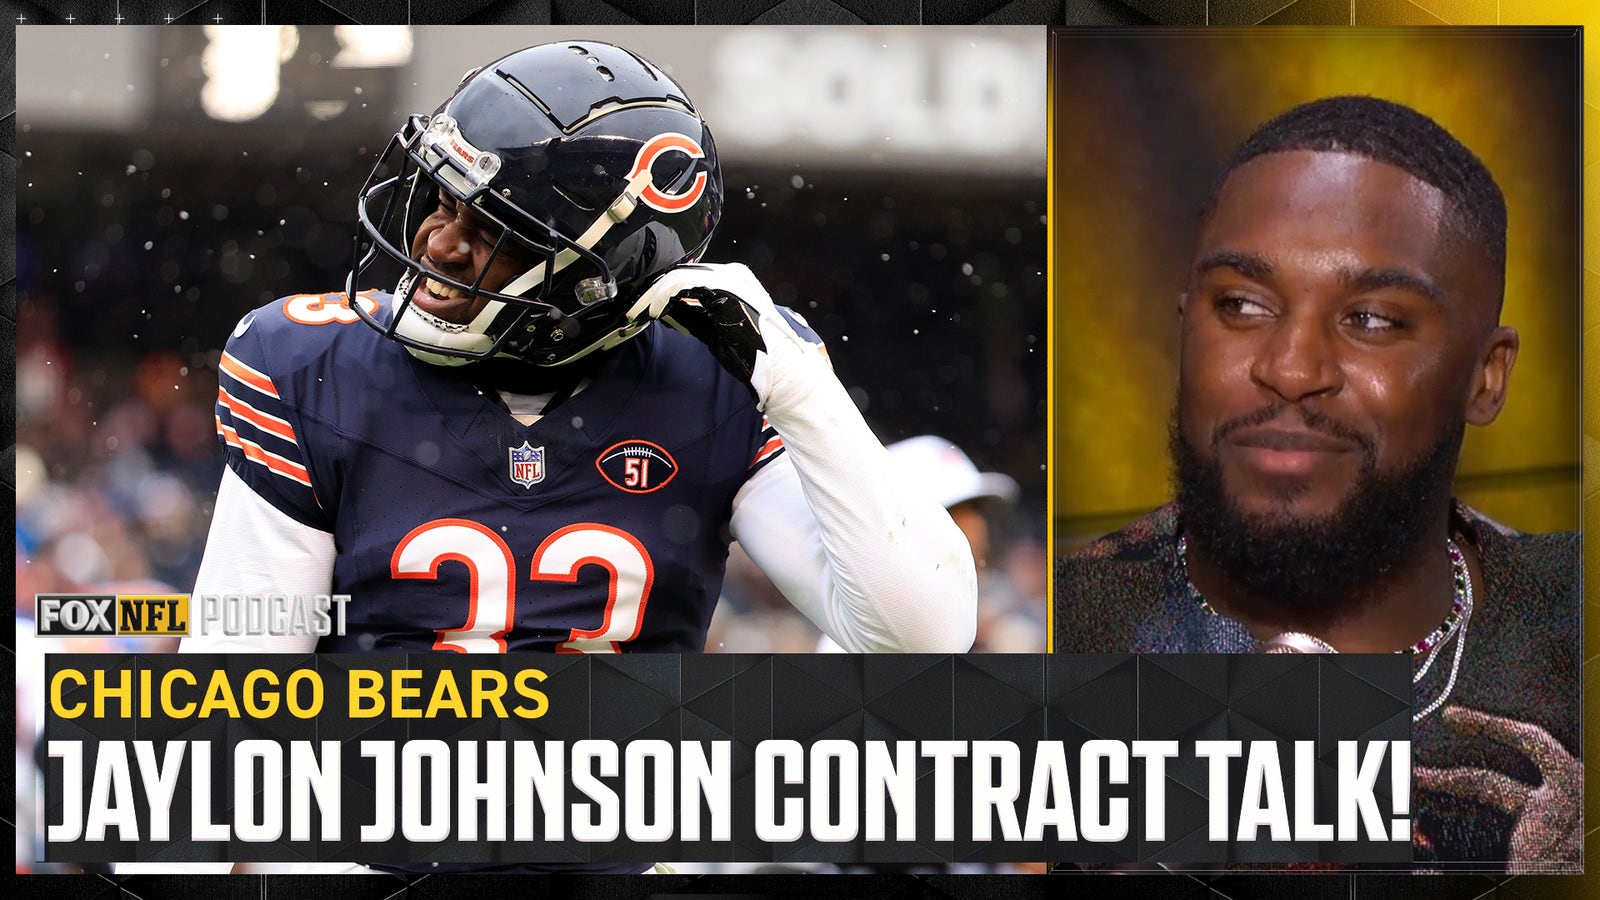 Jaylon Johnson talks contract negotiations and future with Chicago Bears 